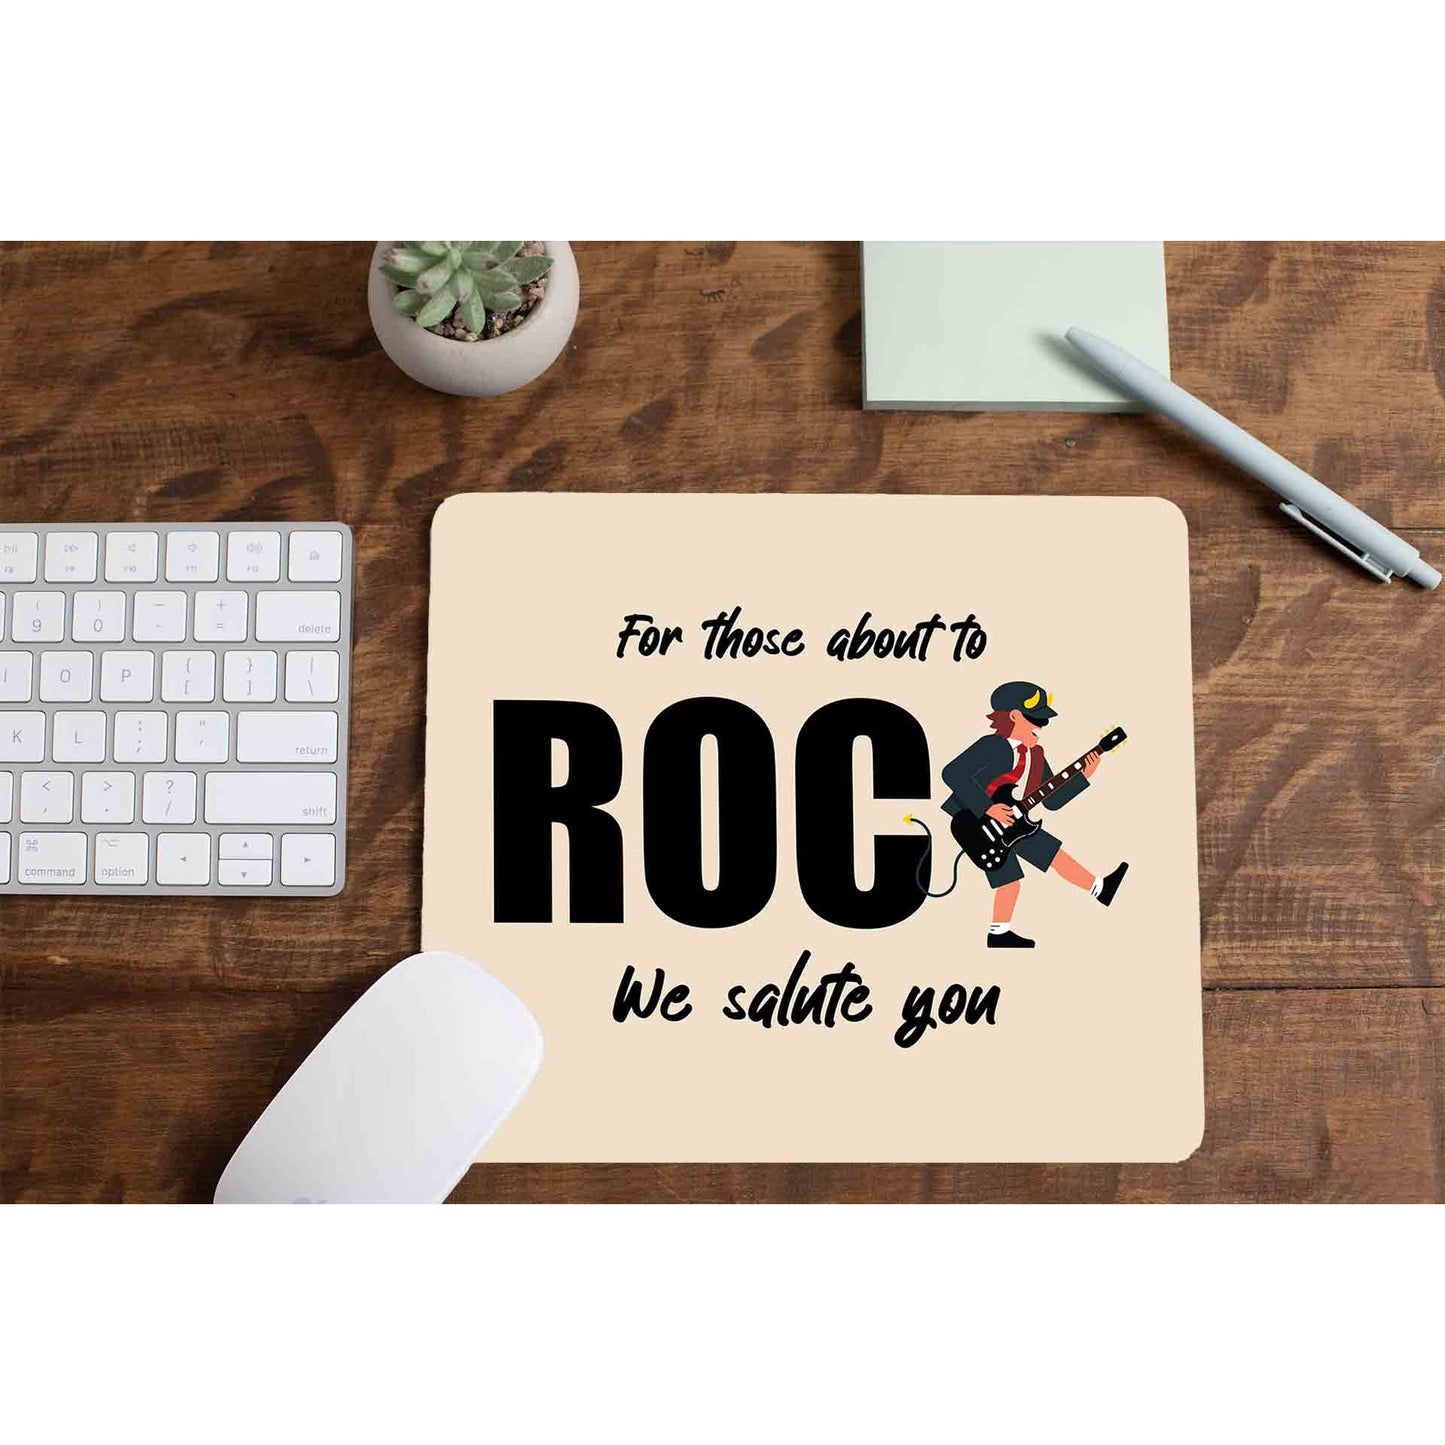 ac/dc for those about to rock mousepad logitech large anime music band buy online india the banyan tee tbt men women girls boys unisex